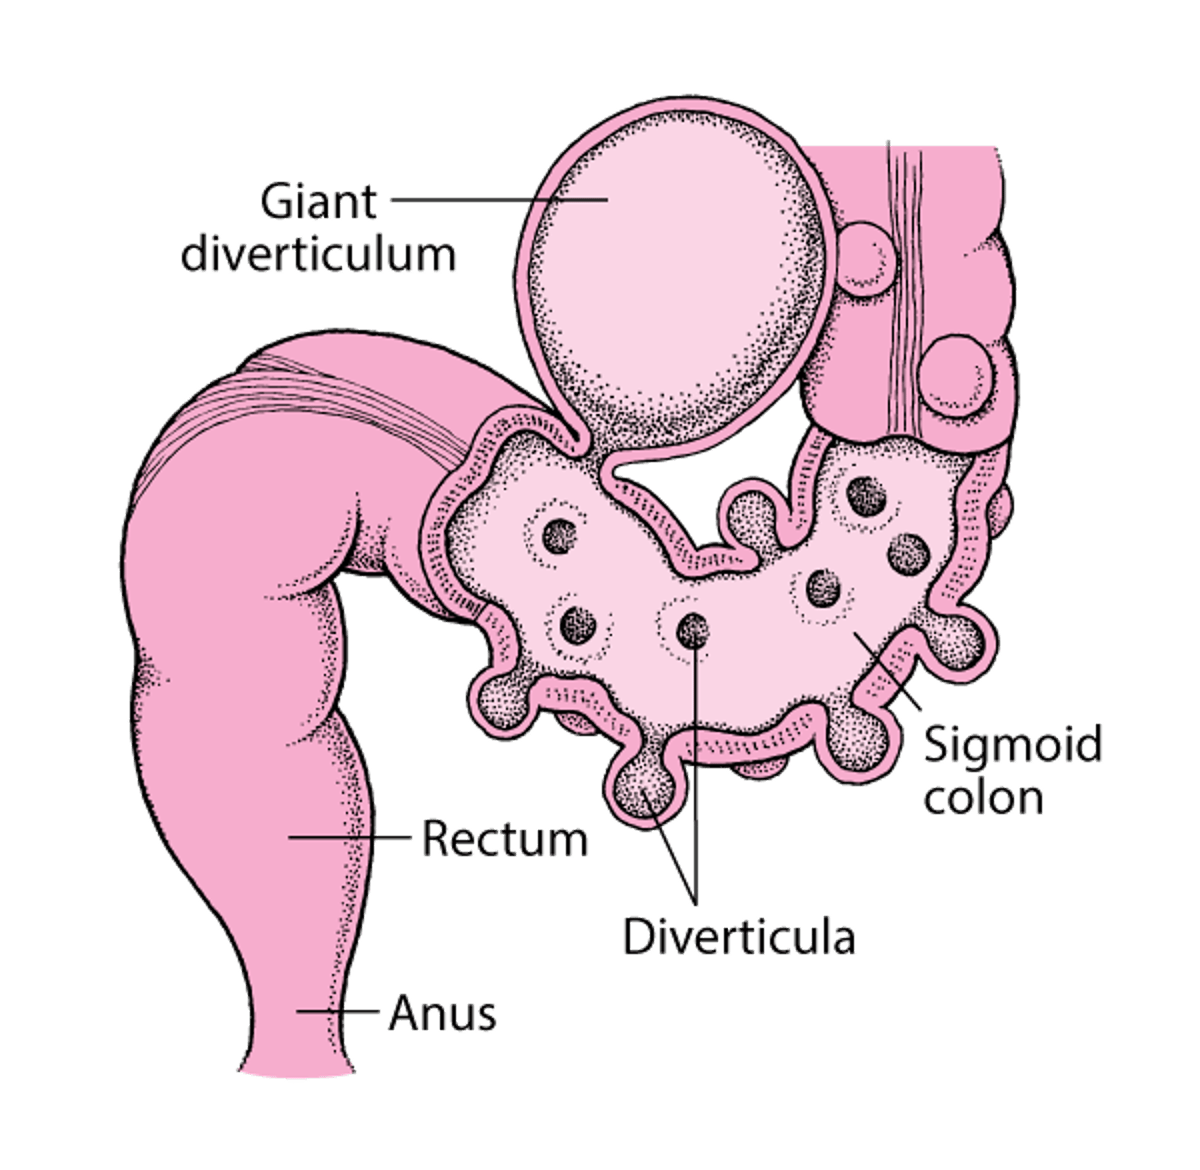 Large Intestine with Diverticula